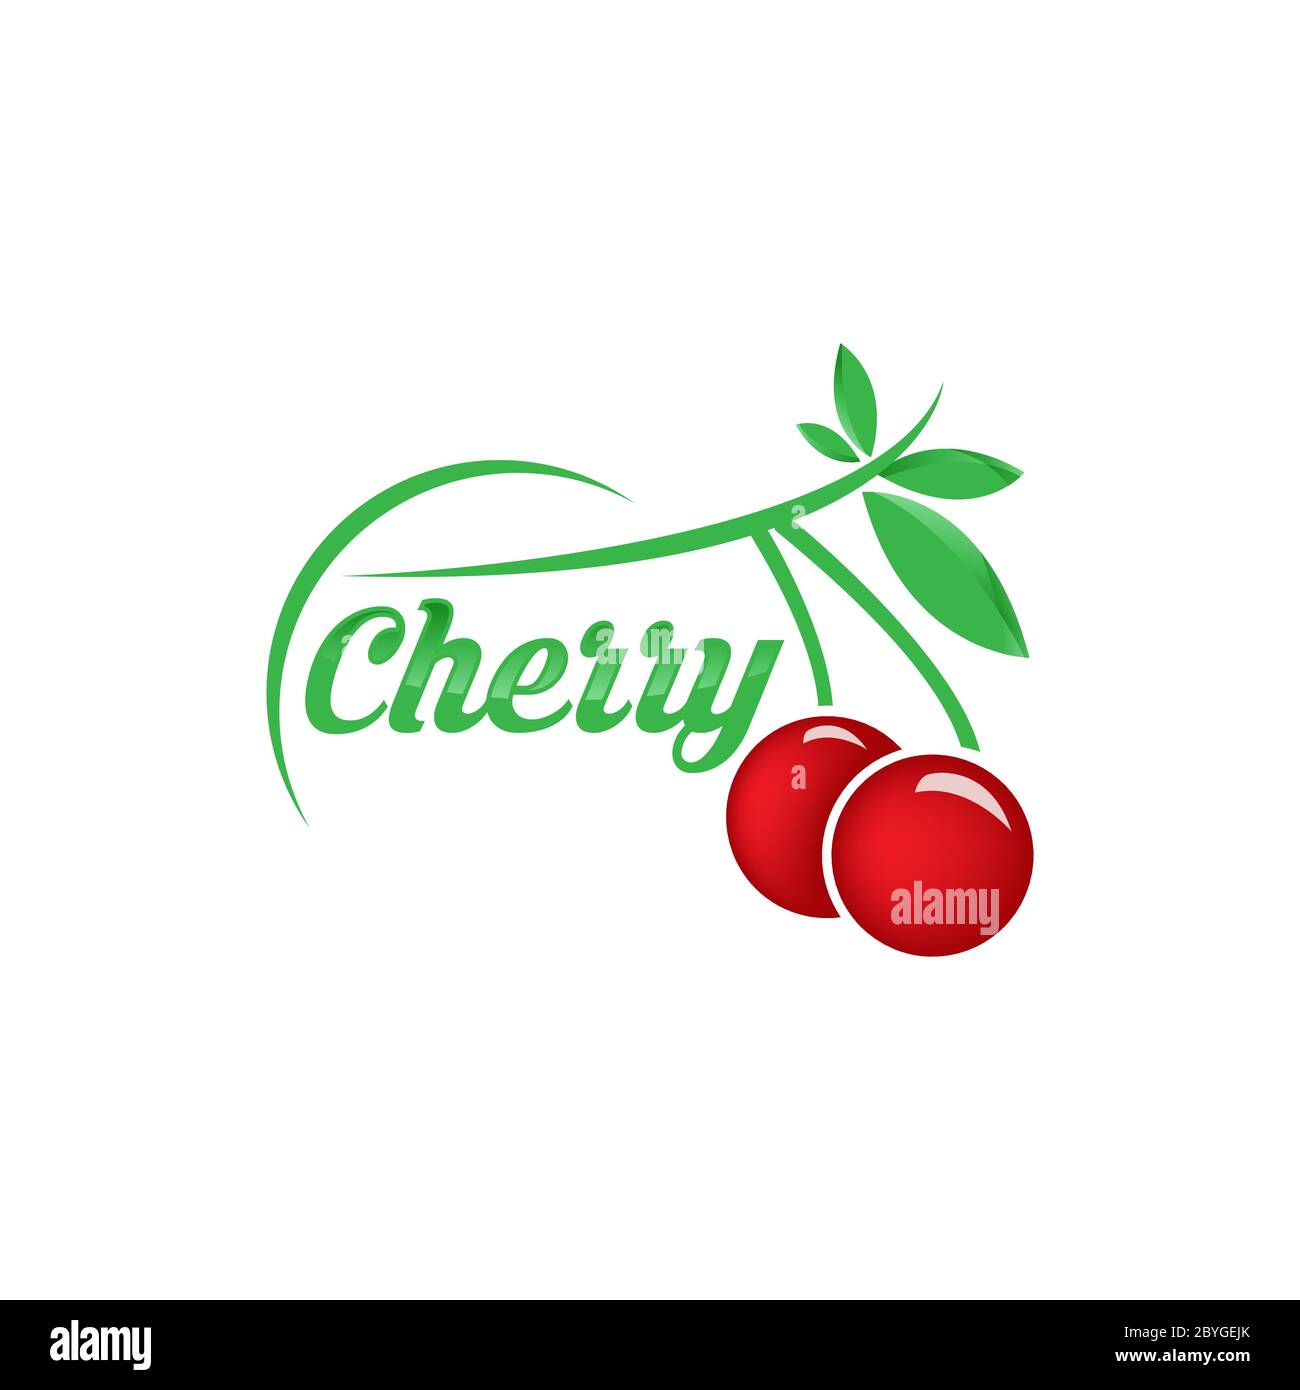 Cherry logo design, creative template with two ripe cherries can be used for cafe, bar, club, grocery store, package, price tag, flyer vector Illustra Stock Vector